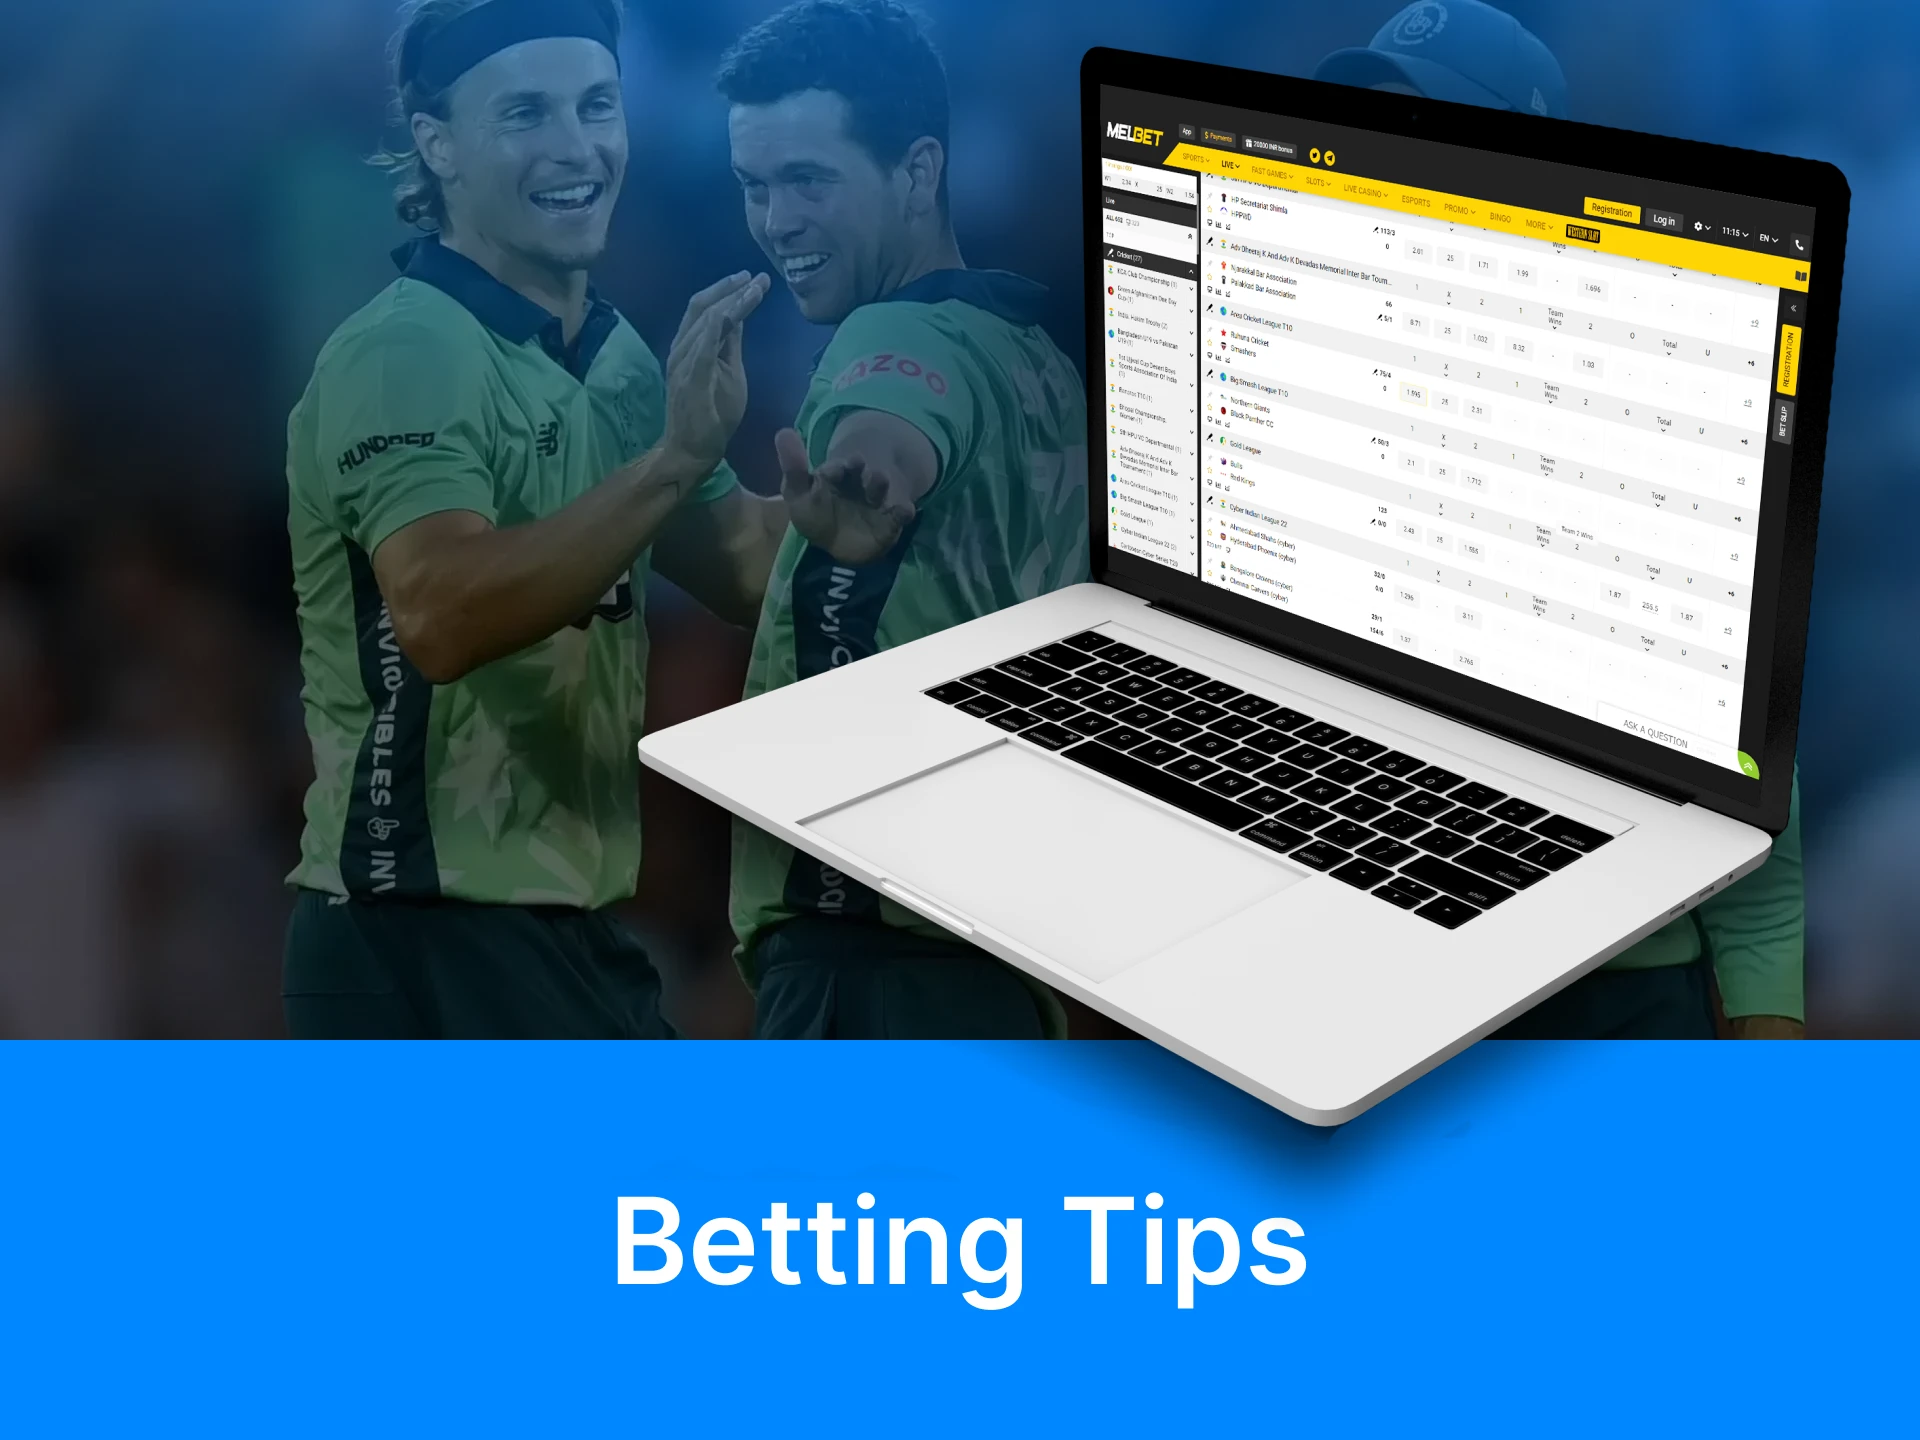 Bet on The Hundred teams using special tips.